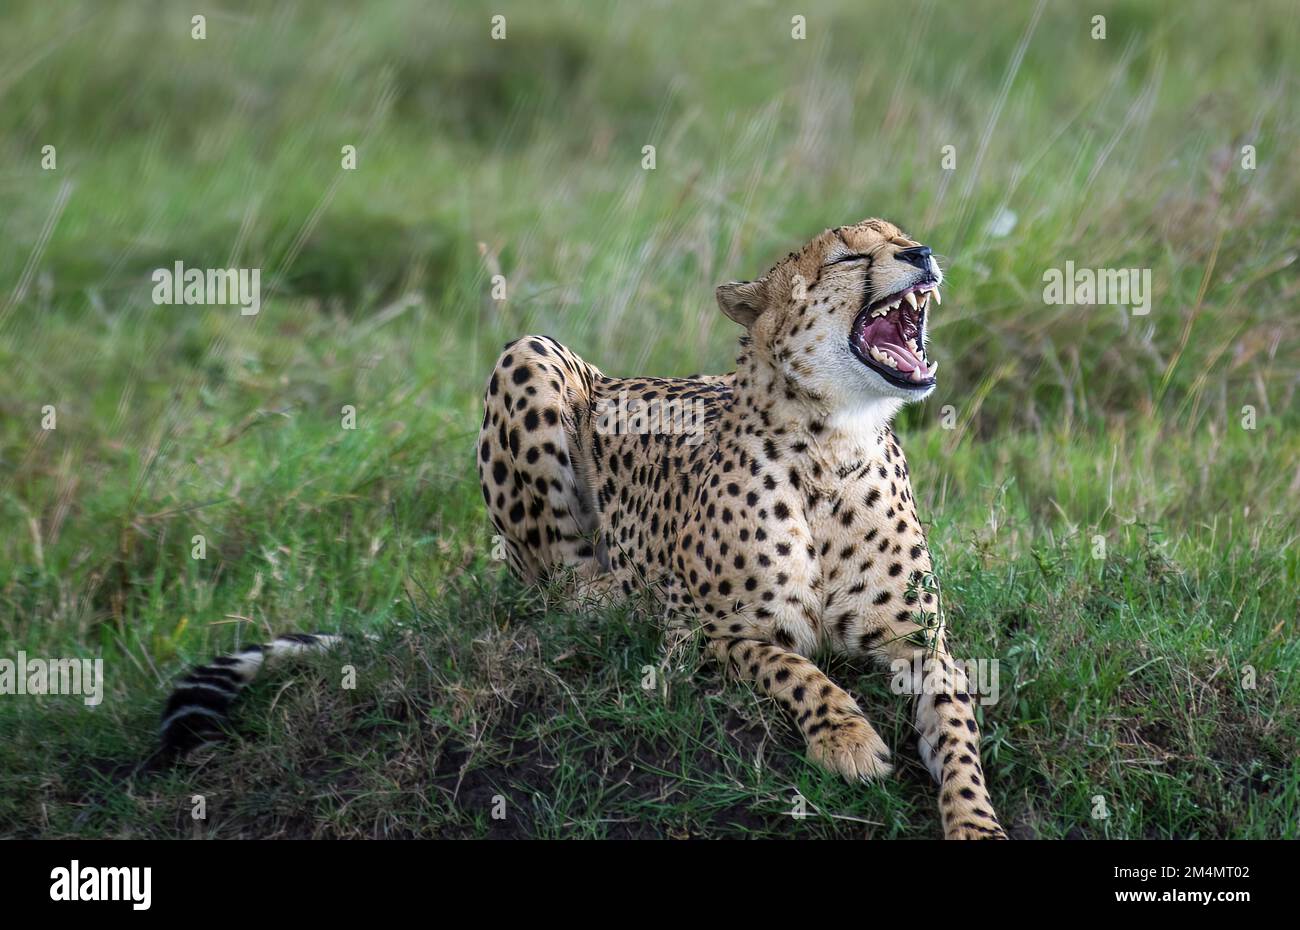 A cheetah running through a grassy field with its mouth open Stock Photo